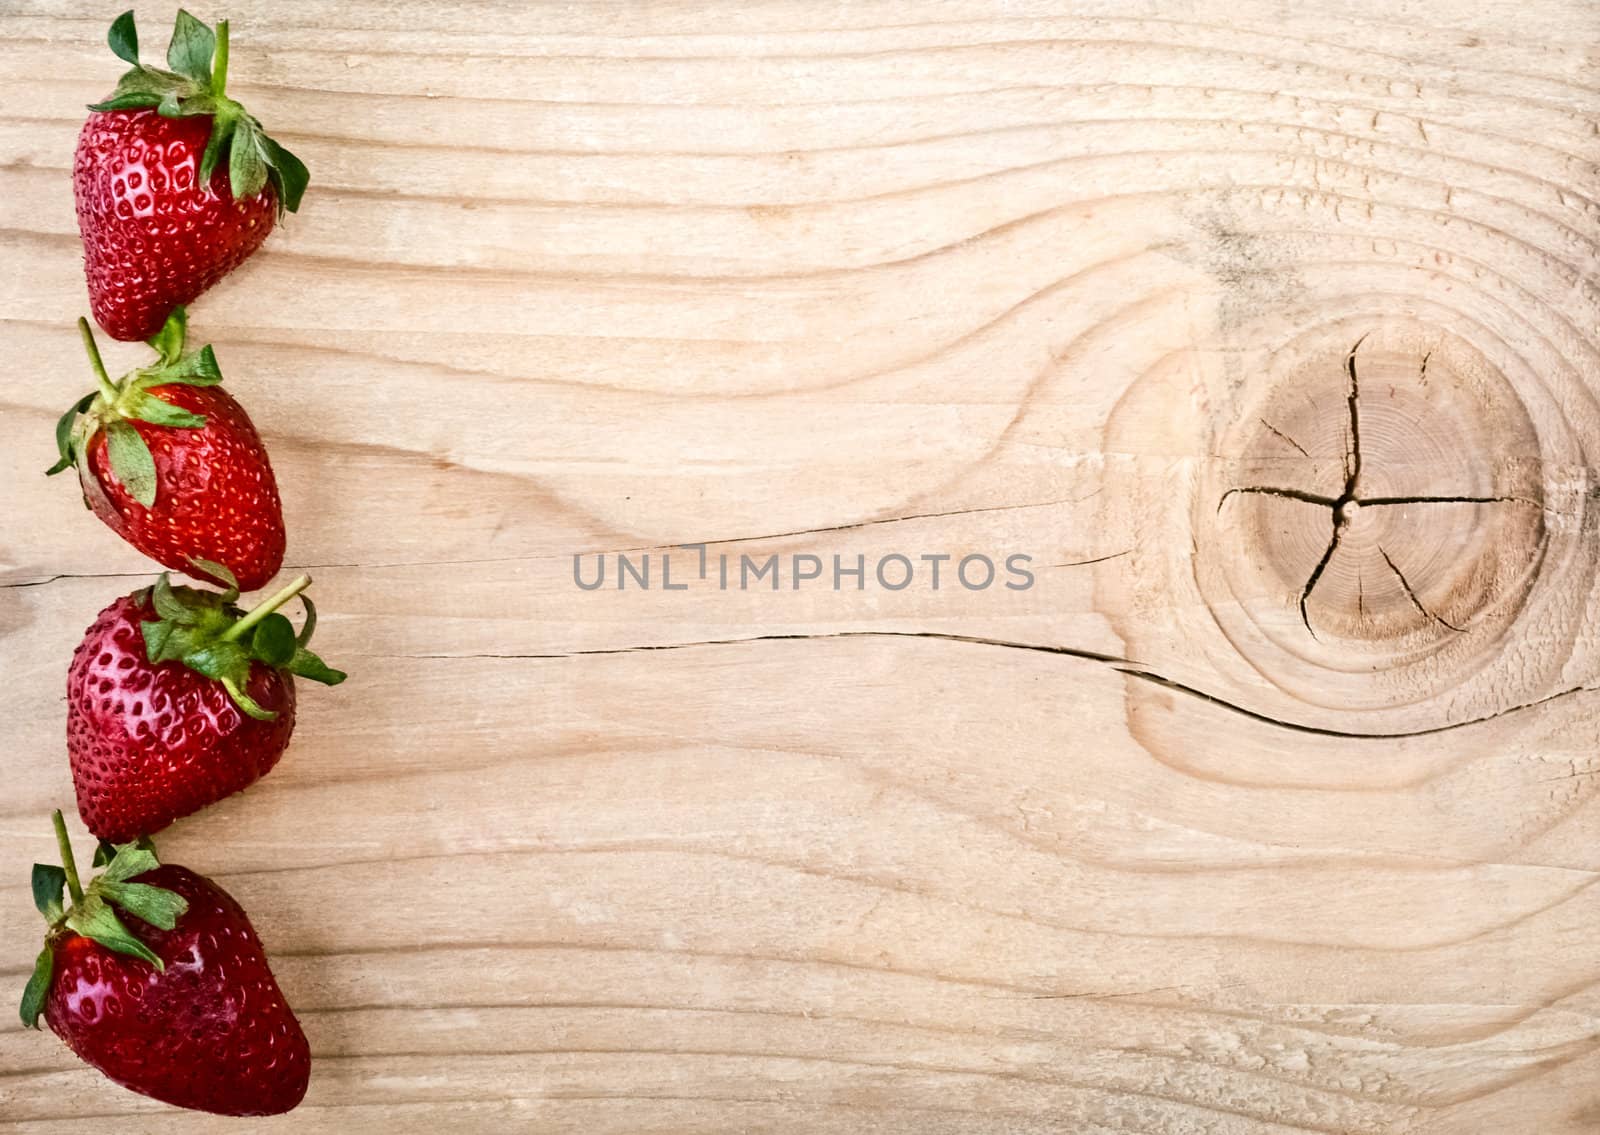 Fresh strawberries on old wooden background